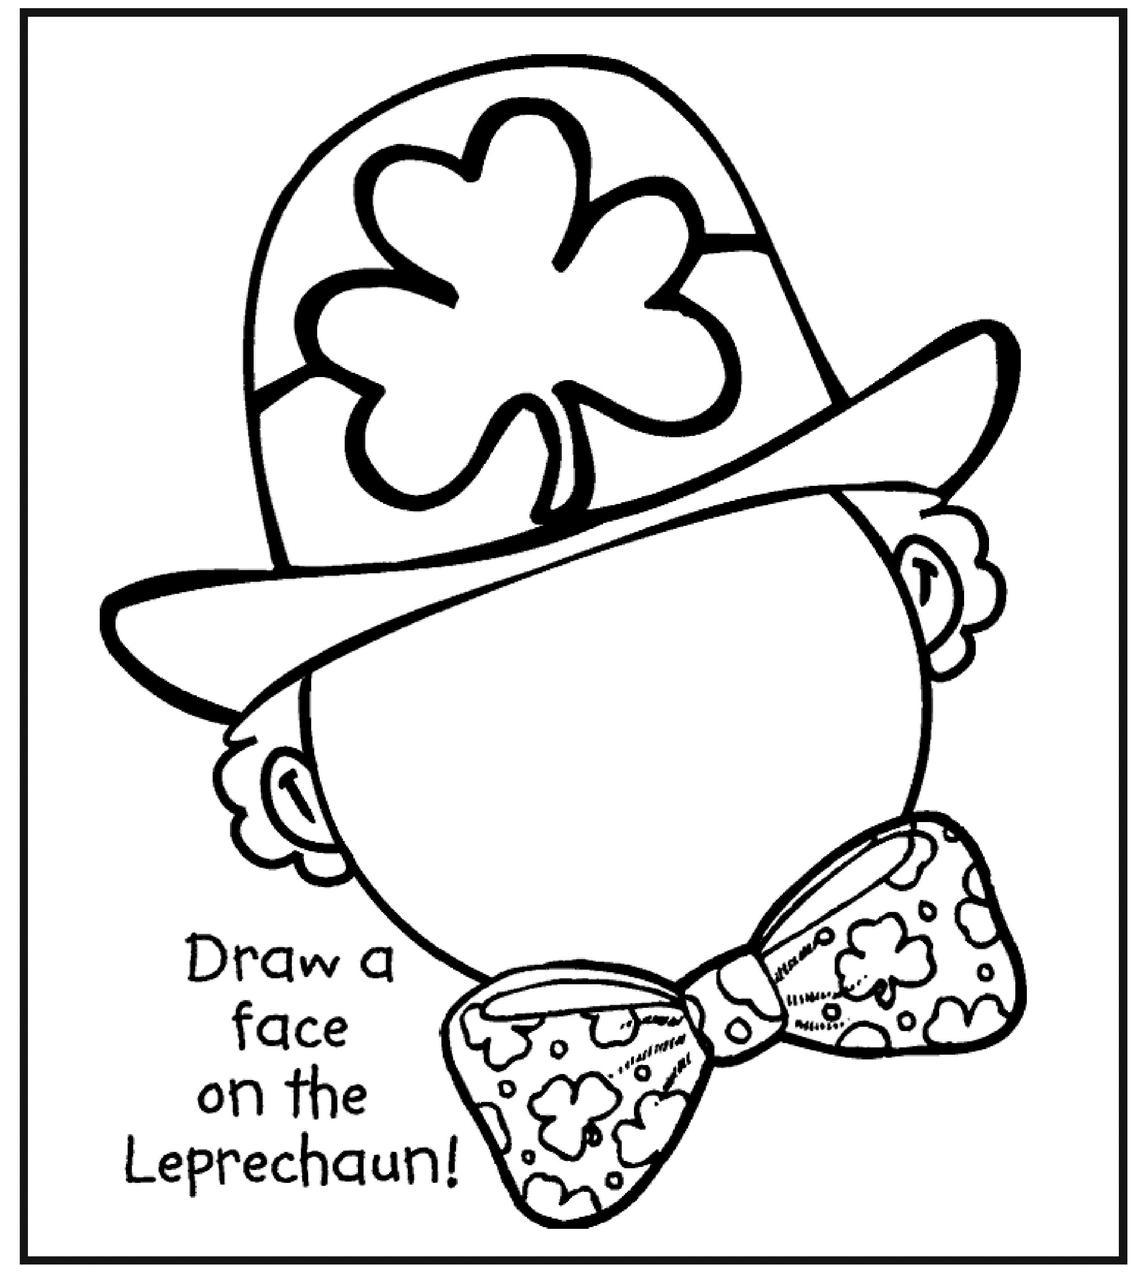 Free St. Patrick's Day Coloring Pages Draw a Face on the Leprechaun printable